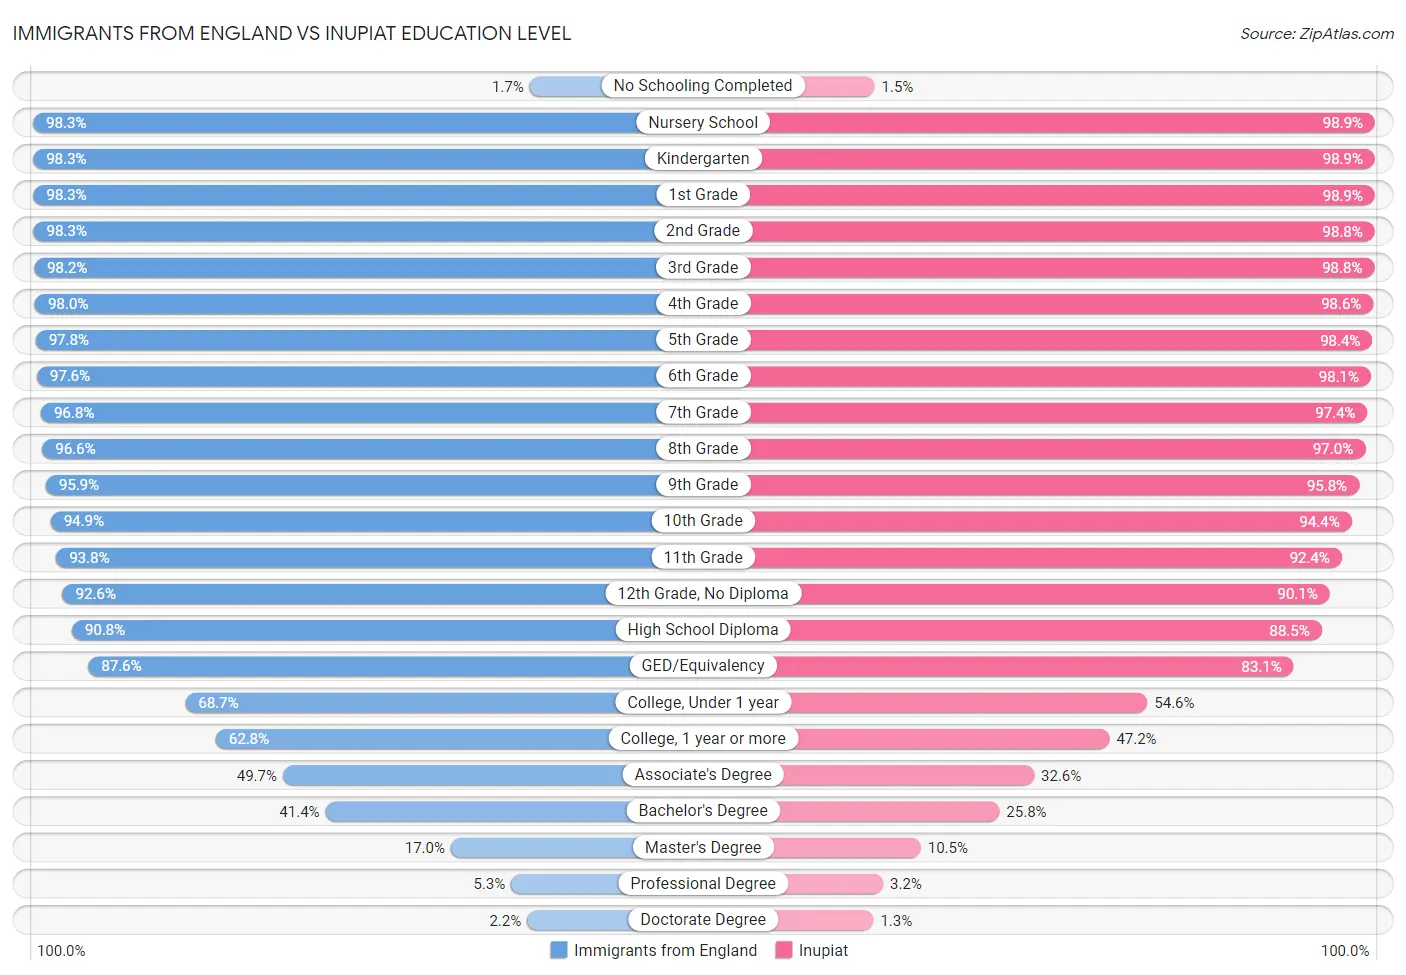 Immigrants from England vs Inupiat Education Level